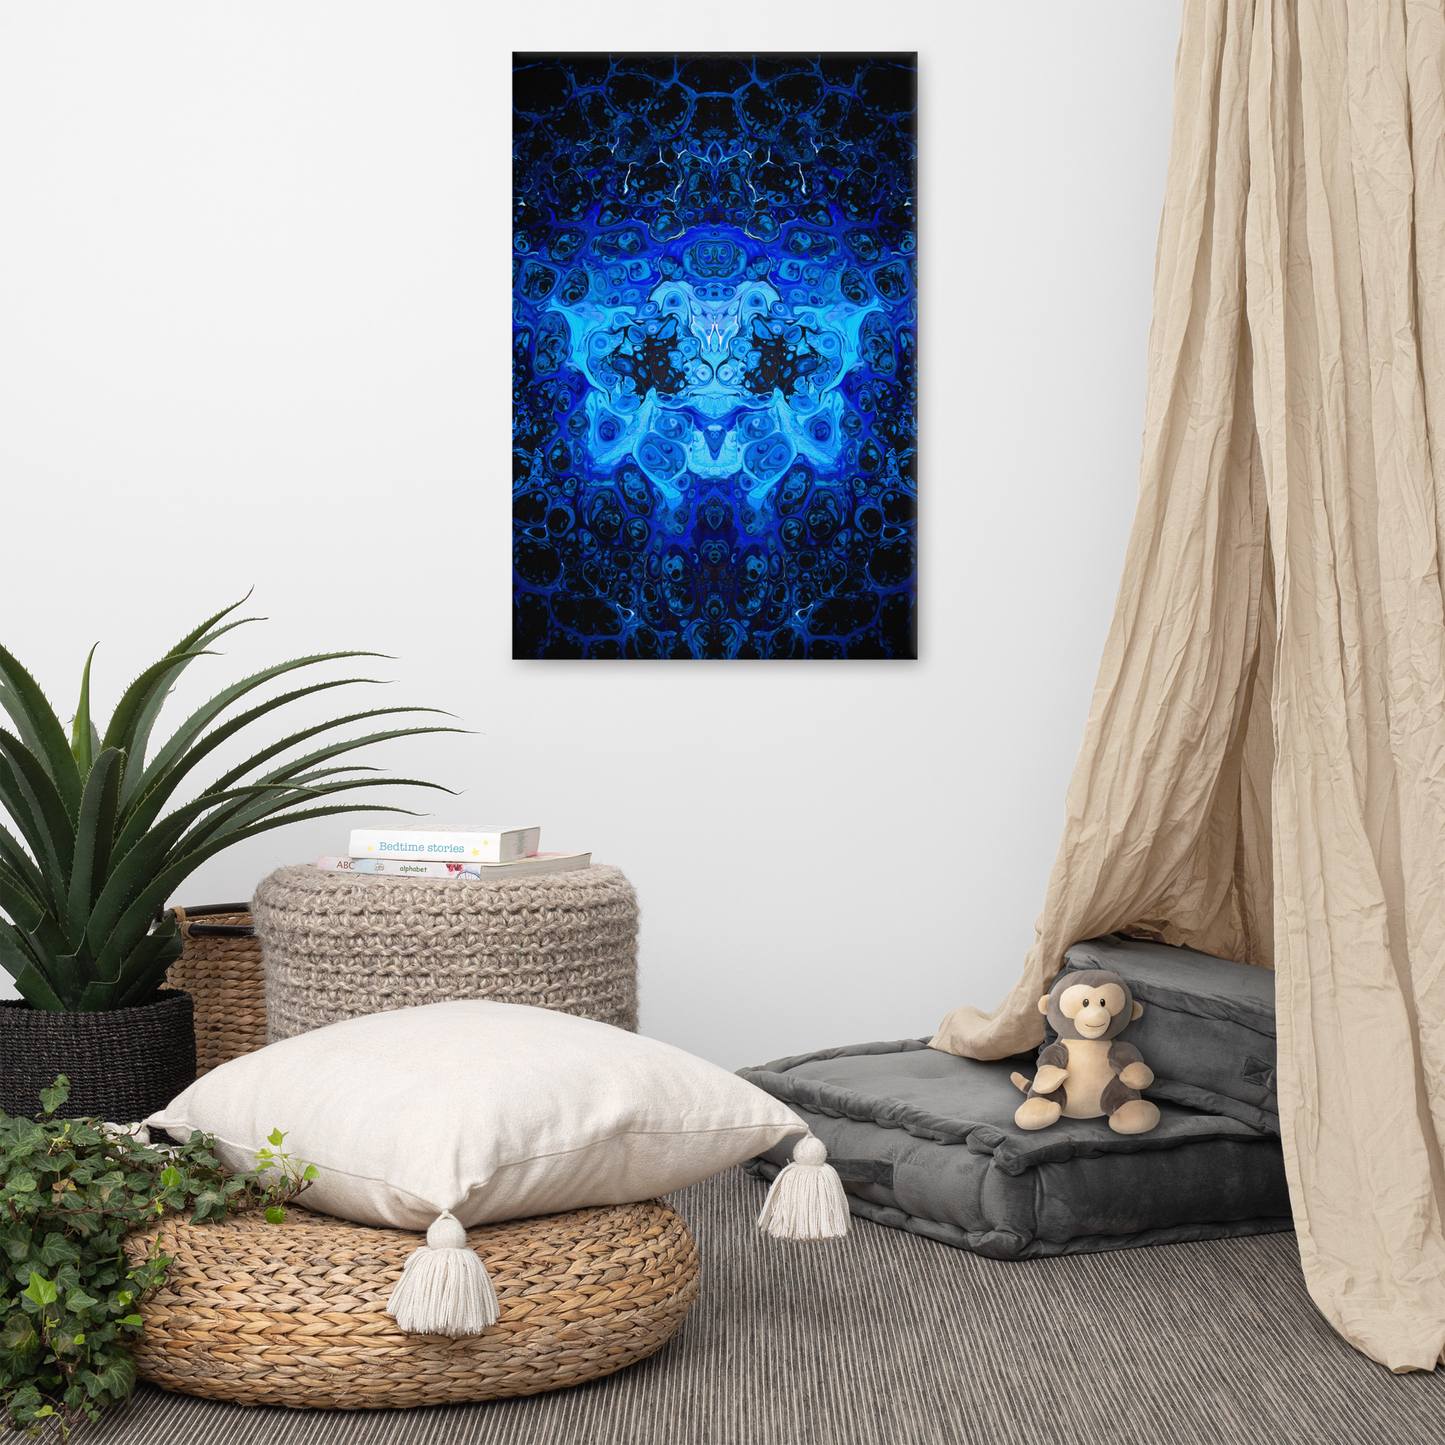 NightOwl Studio Abstract Wall Art, Blue Bliss, Boho Living Room, Bedroom, Office, and Home Decor, Premium Canvas with Wooden Frame, Acrylic Painting Reproduction, 24” x 36”